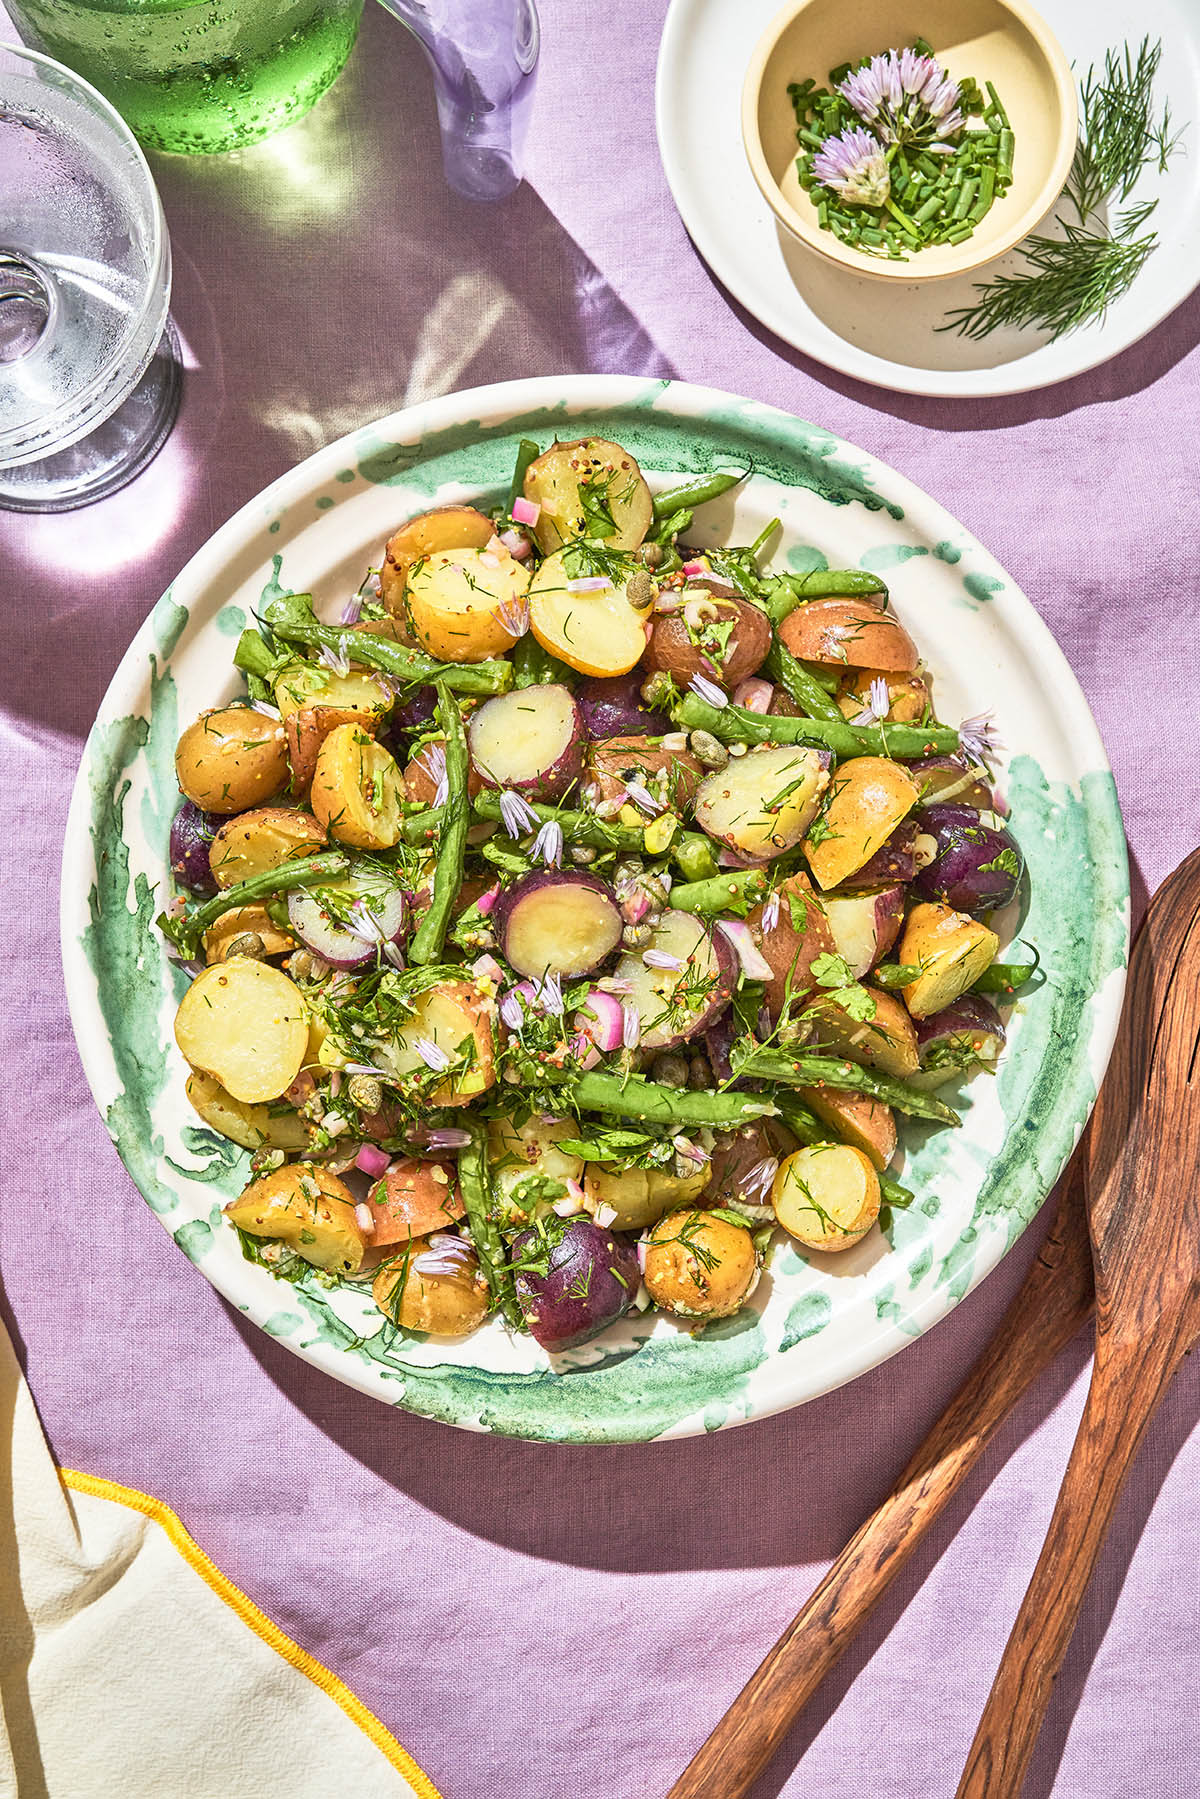 Potato salad with herbs and green beans in a big bowl on a picnic blanket.